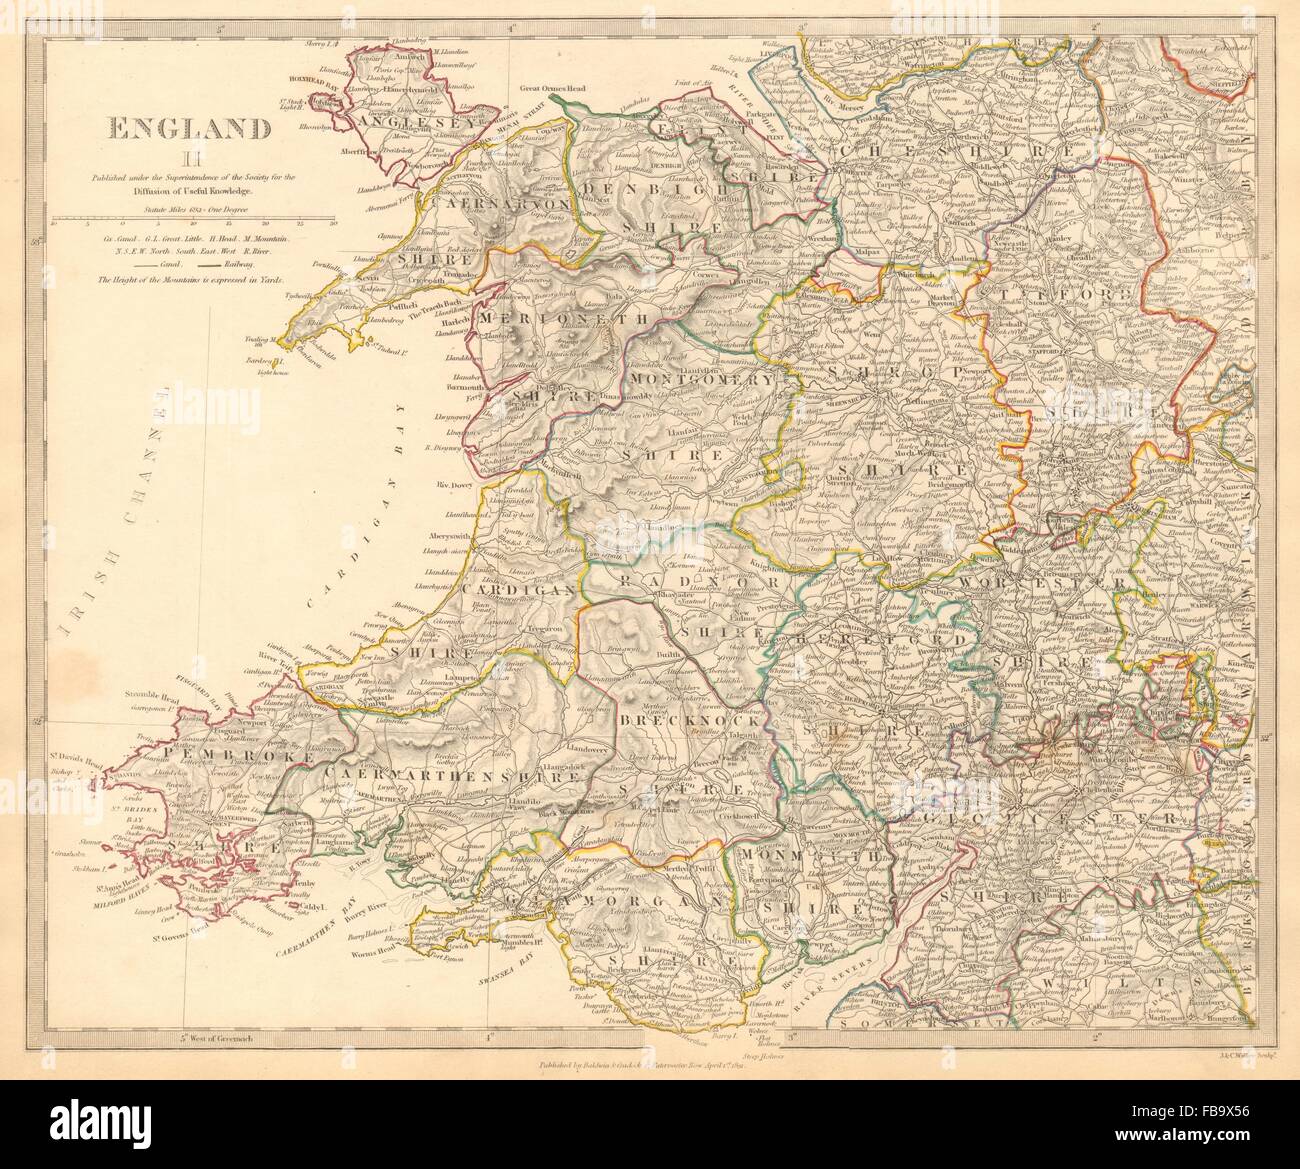 WALES & ENGLAND WEST MIDLANDS. Showing counties. Original colour.SDUK, 1844 map Stock Photo